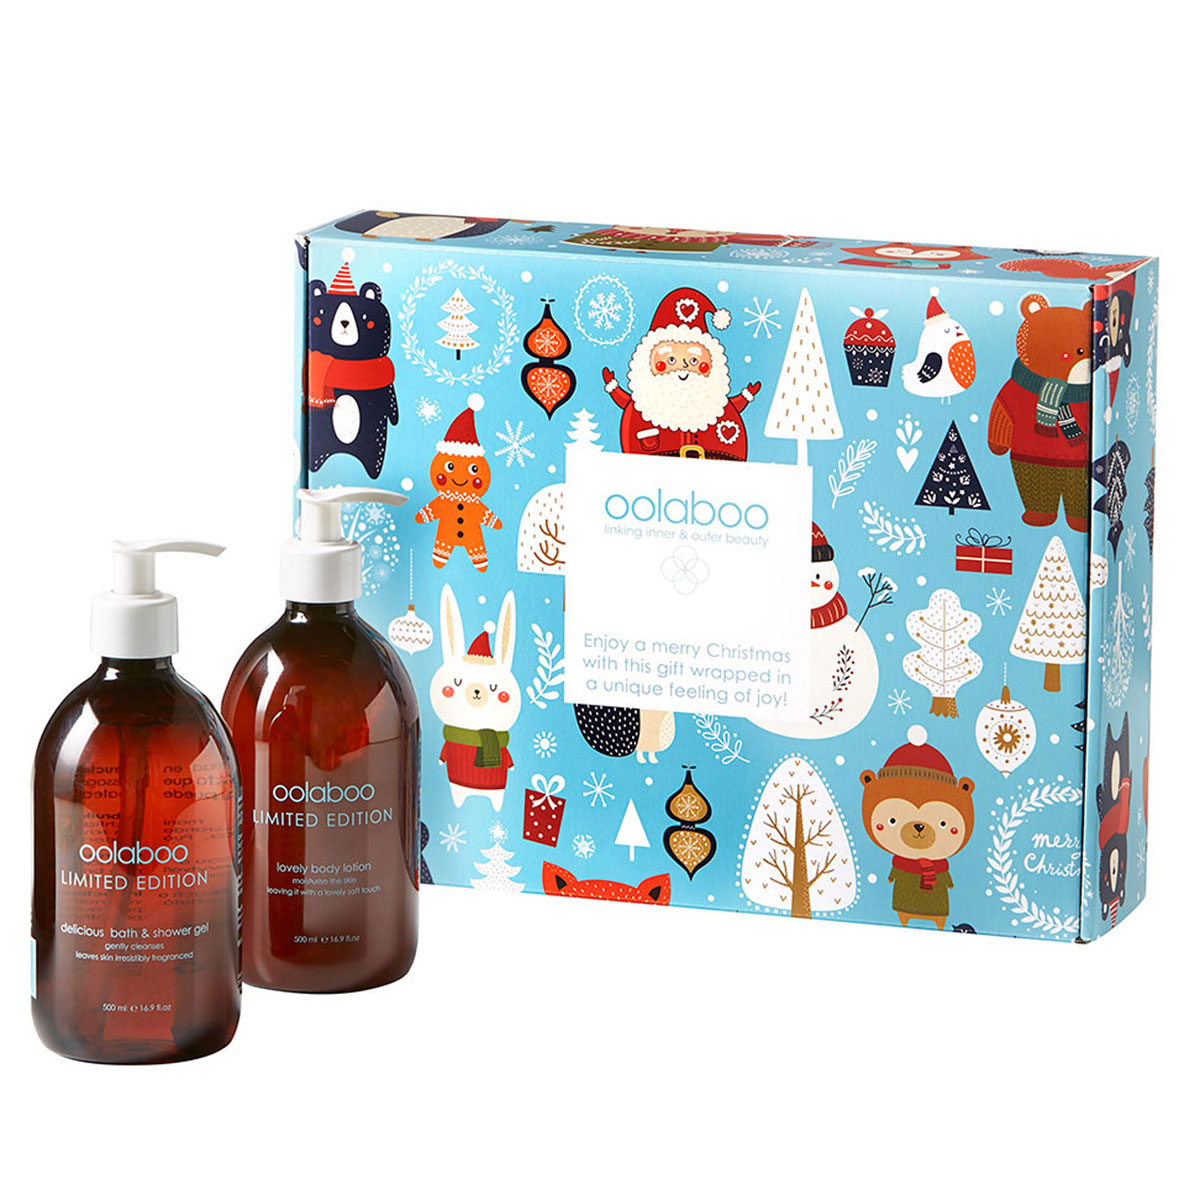 Oolaboo Christmas Body Lotion Delicious Bath & Shower Gel - Delivery in Czech Republic by GiftsForEurope